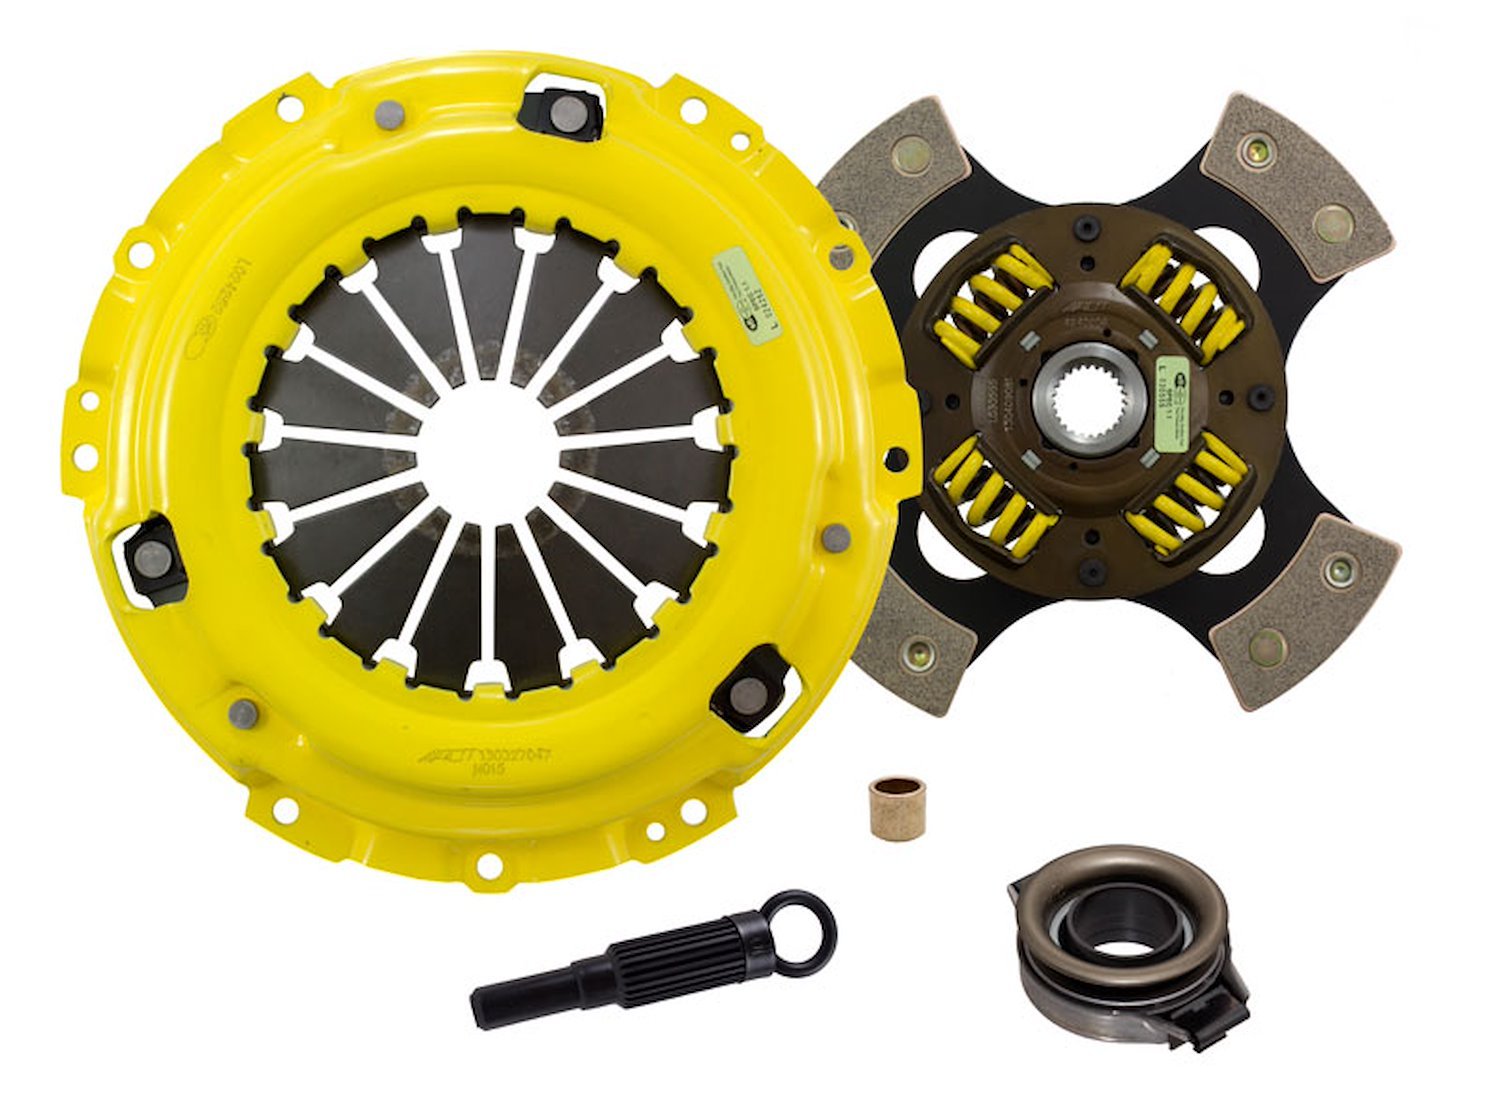 HD/Race Sprung 4-Pad Transmission Clutch Kit Fits Select